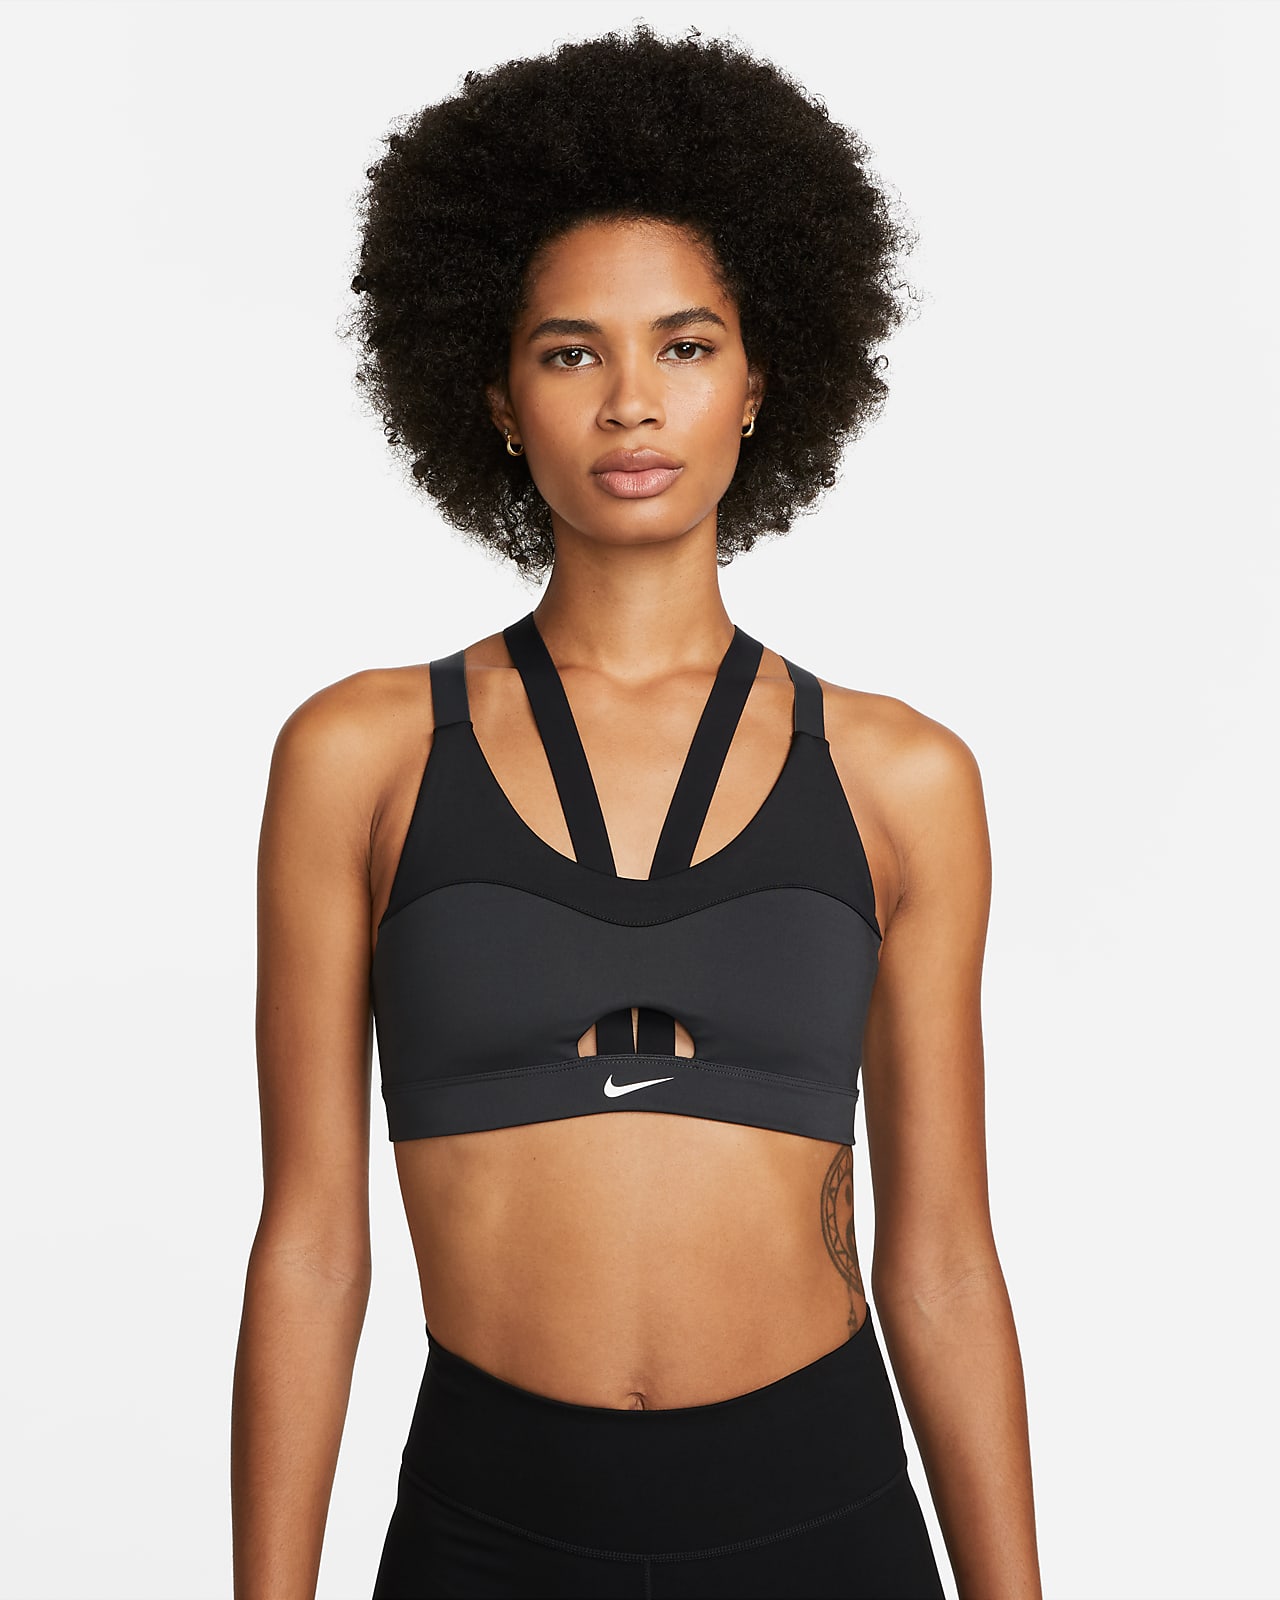 Jarra porcelana Claire Nike Indy Women's Light-Support Padded Strappy Cutout Sports Bra. Nike.com